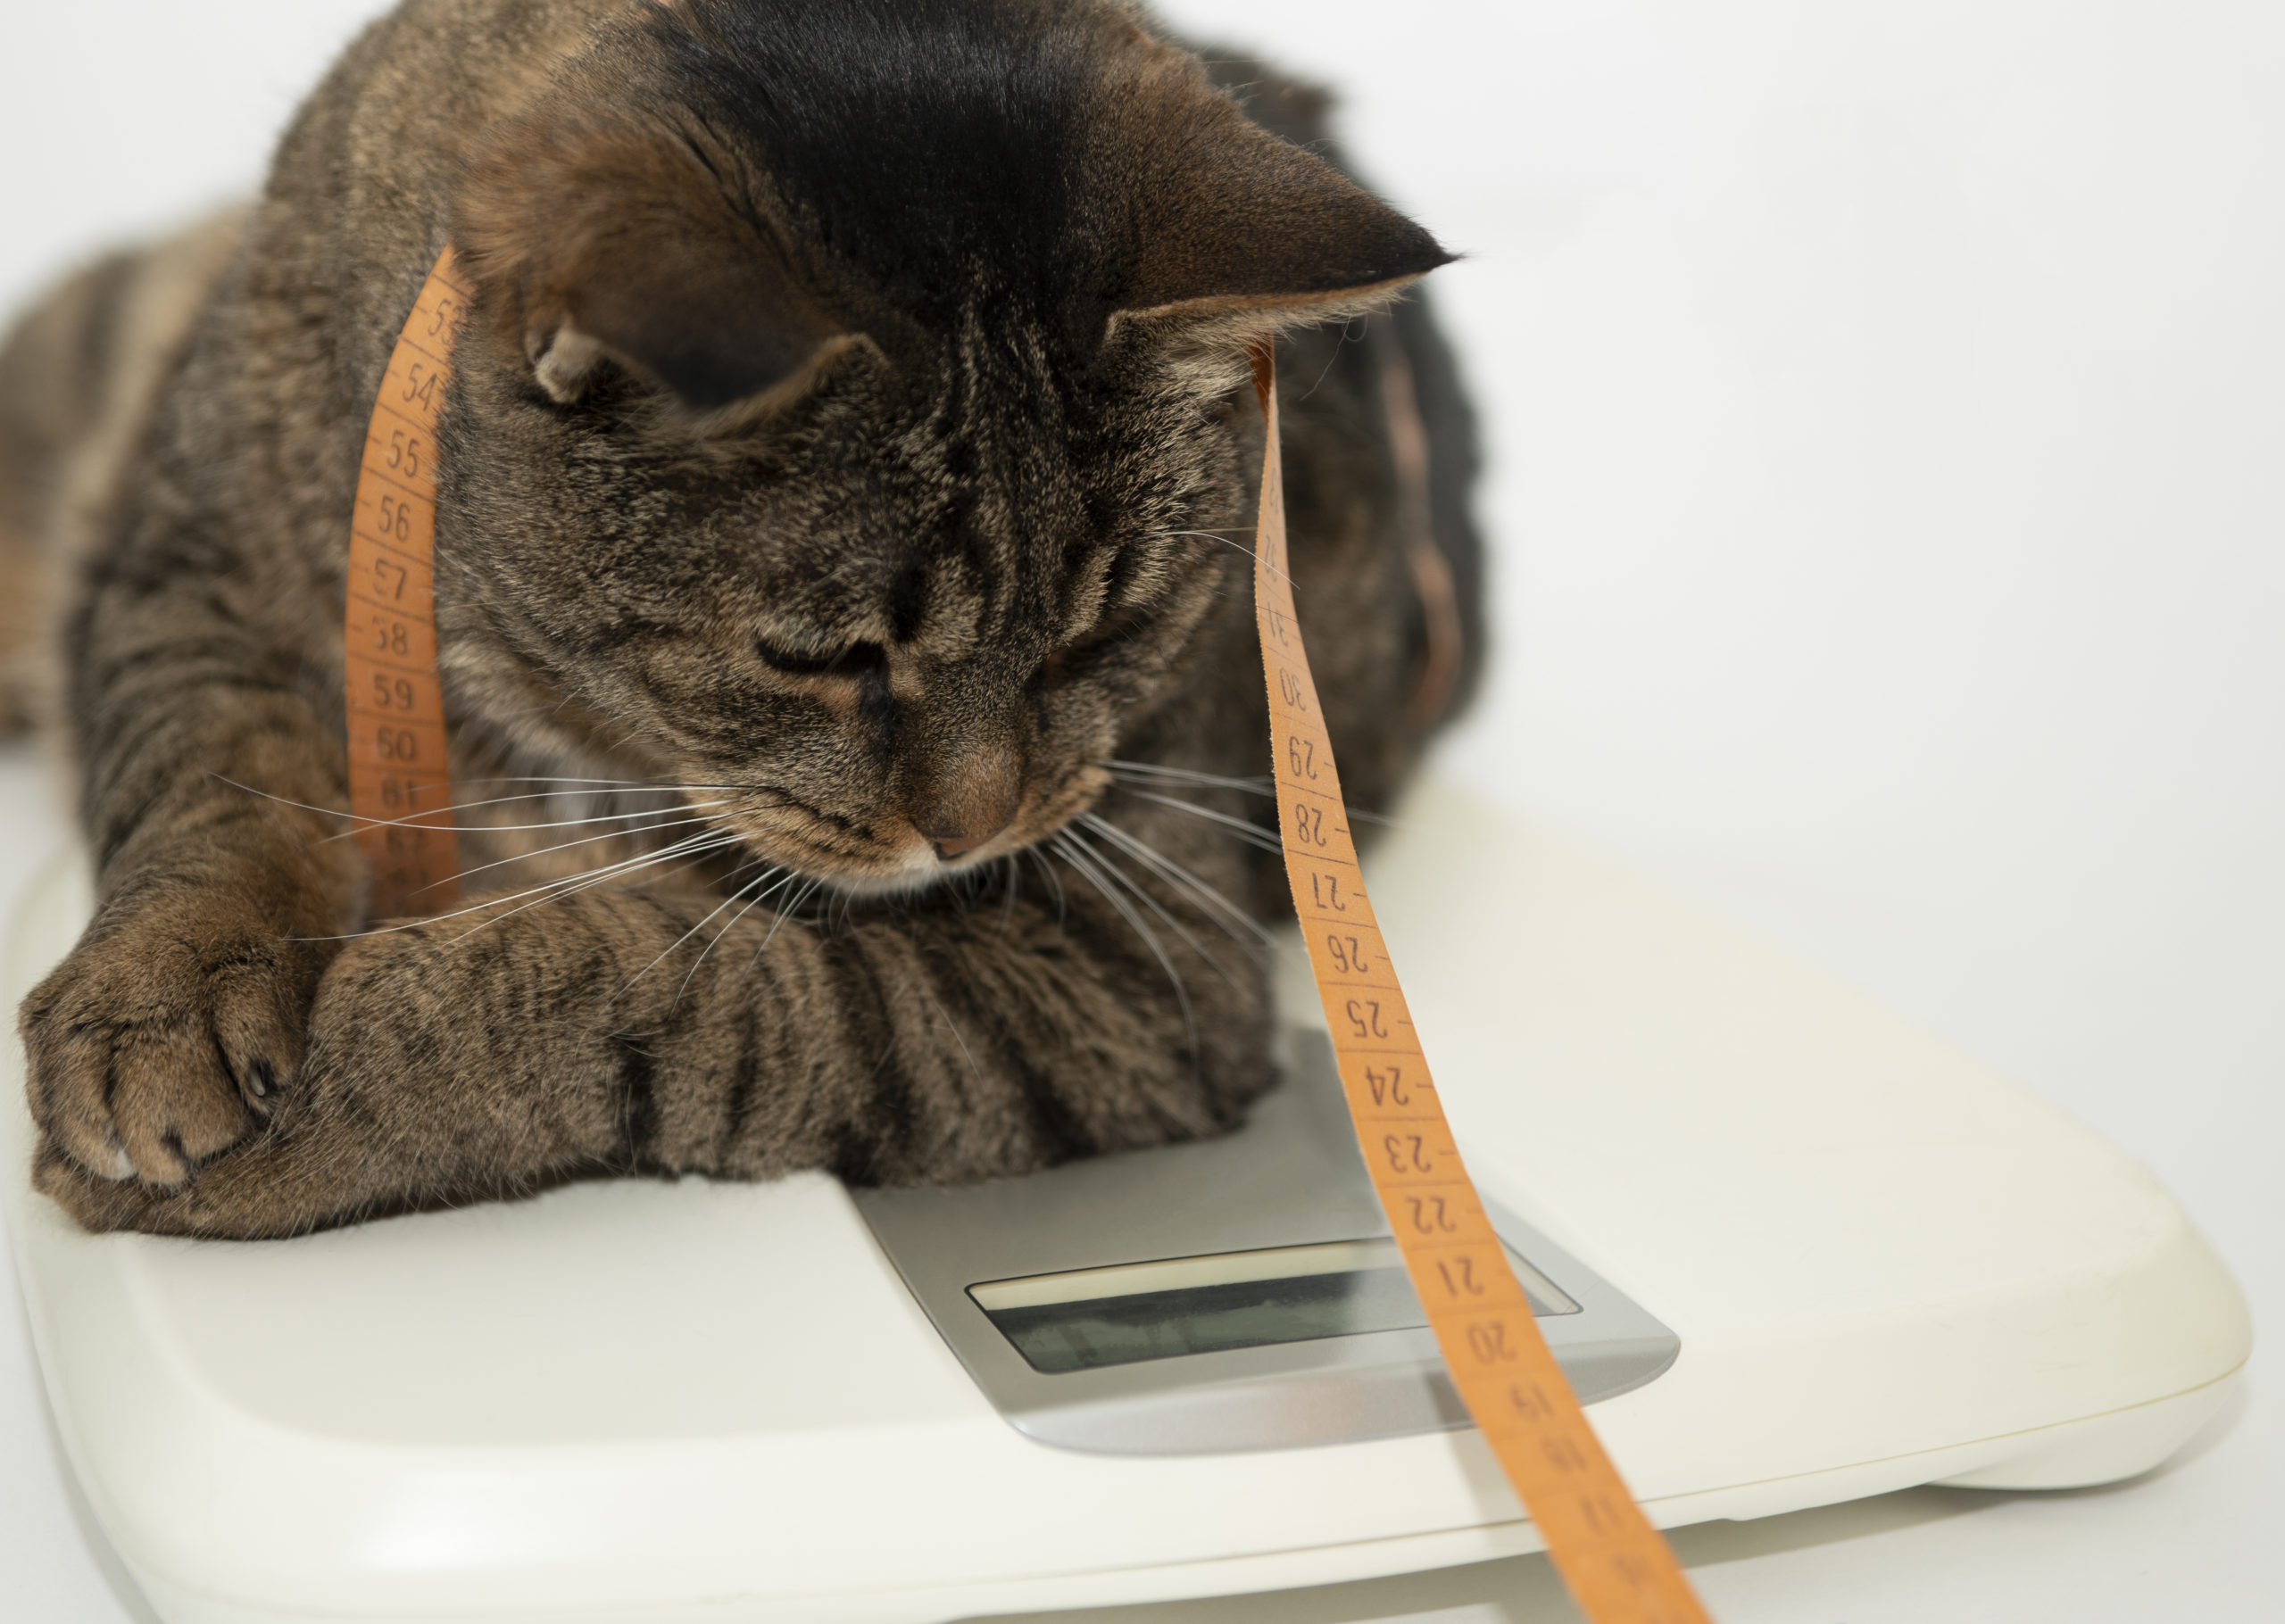 Fat cat on scales on white background. Weight control concept. Copy space.